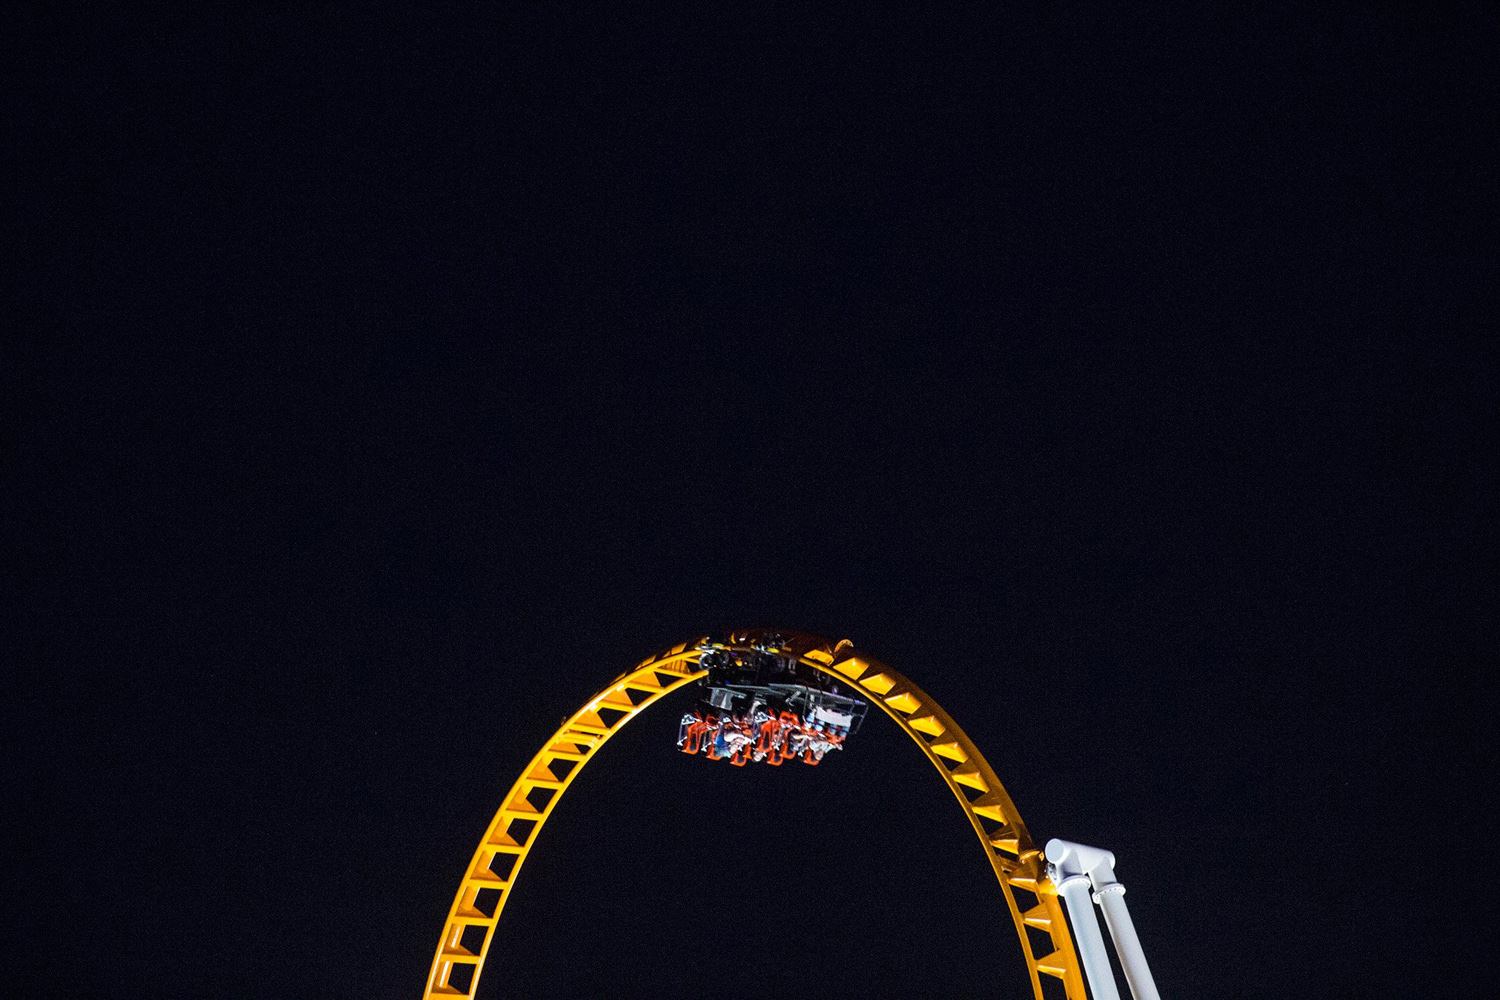 People enjoy a roller coaster at Coney Island in New York City on Aug. 26, 2014.